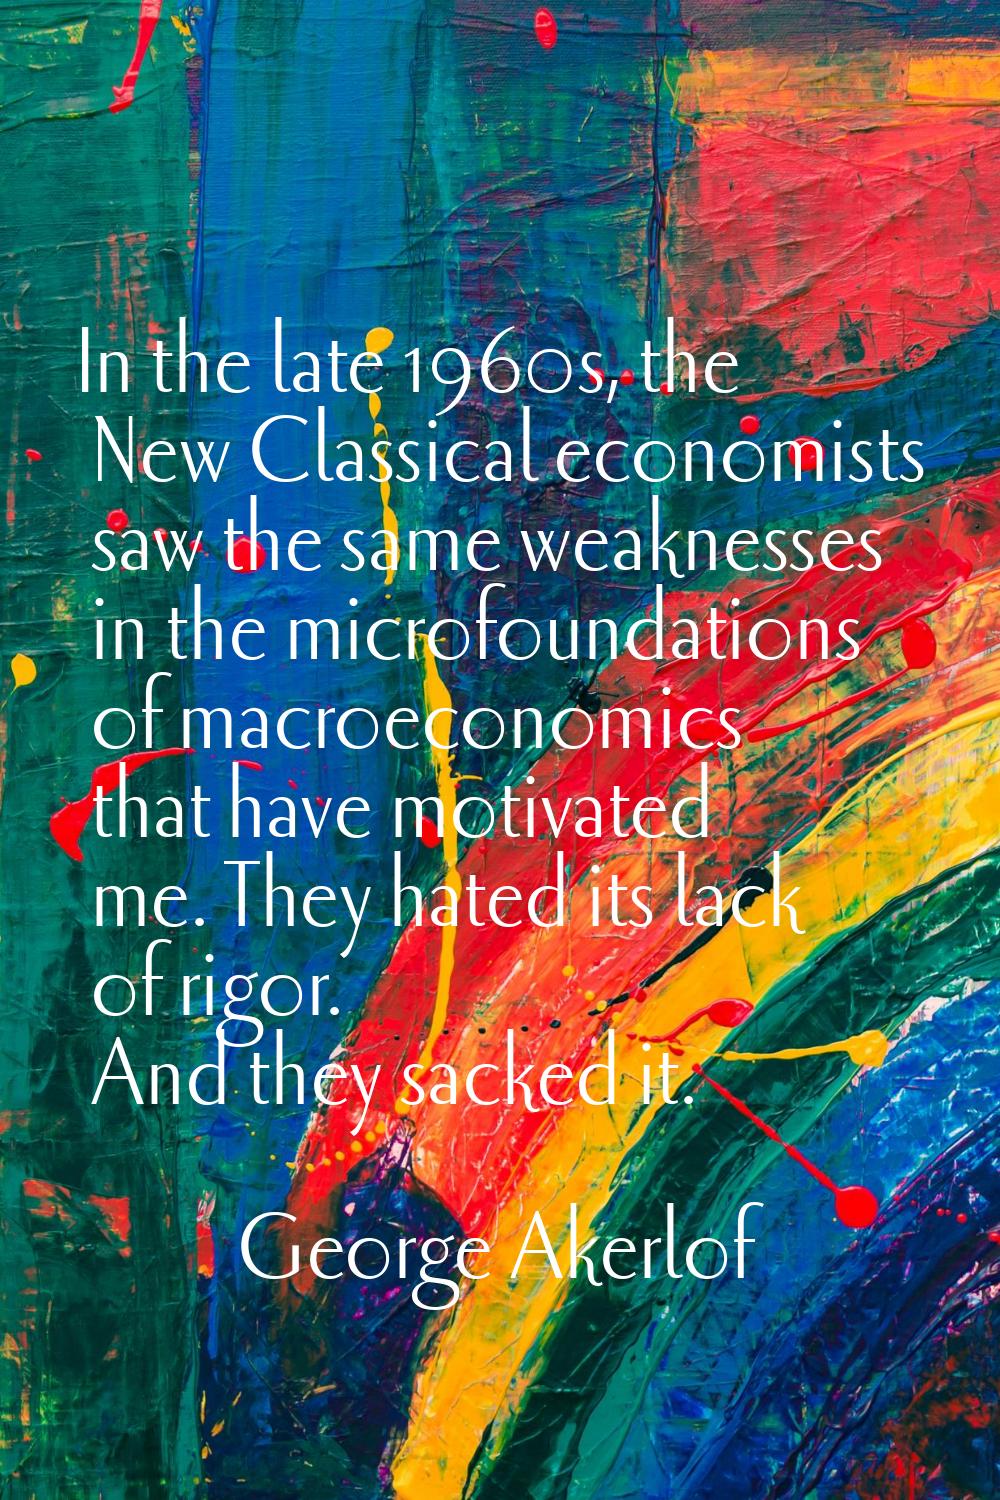 In the late 1960s, the New Classical economists saw the same weaknesses in the microfoundations of 